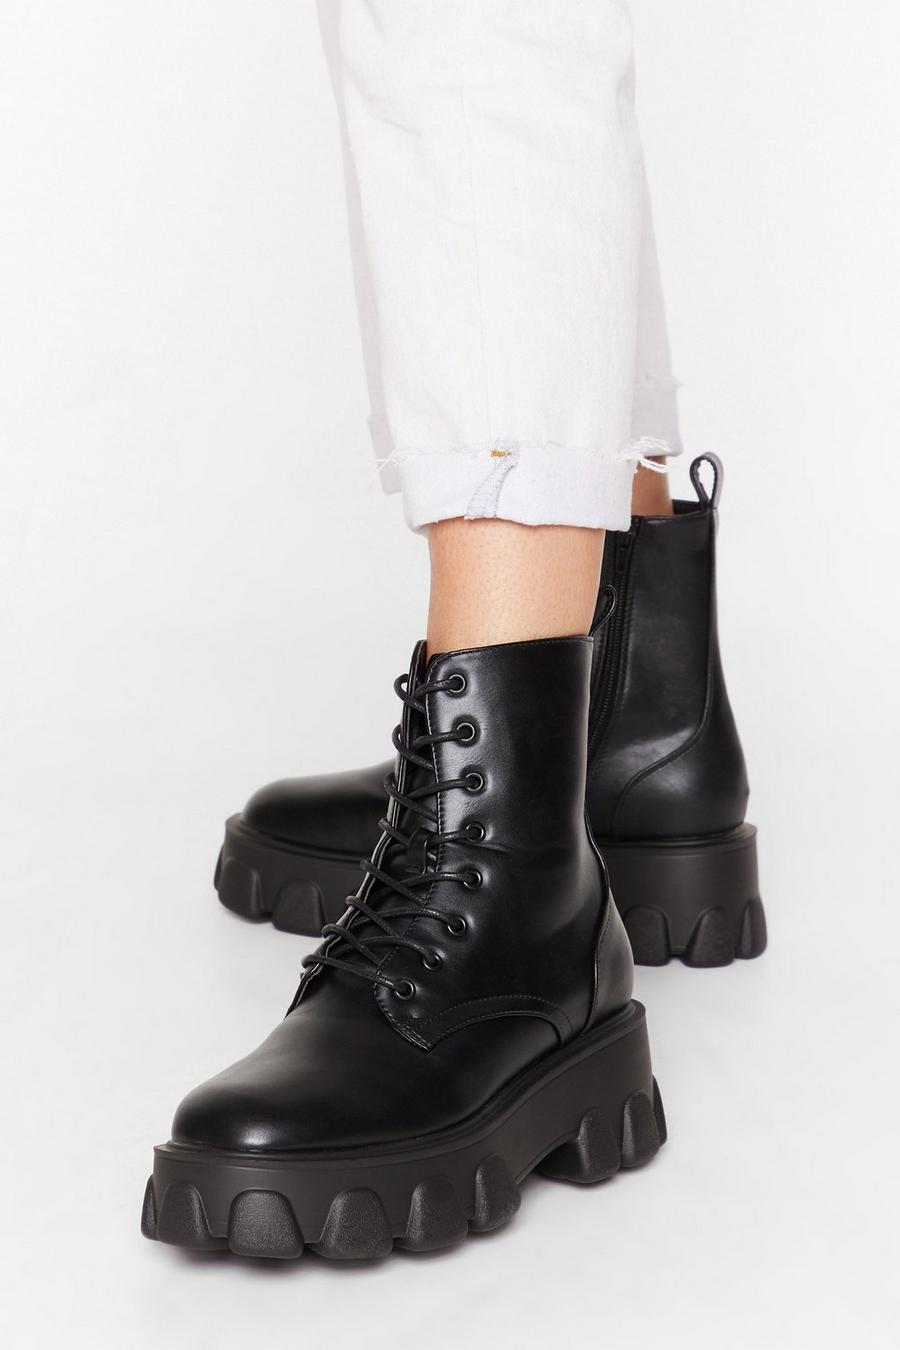 Cleated Platform Faux Leather Boots